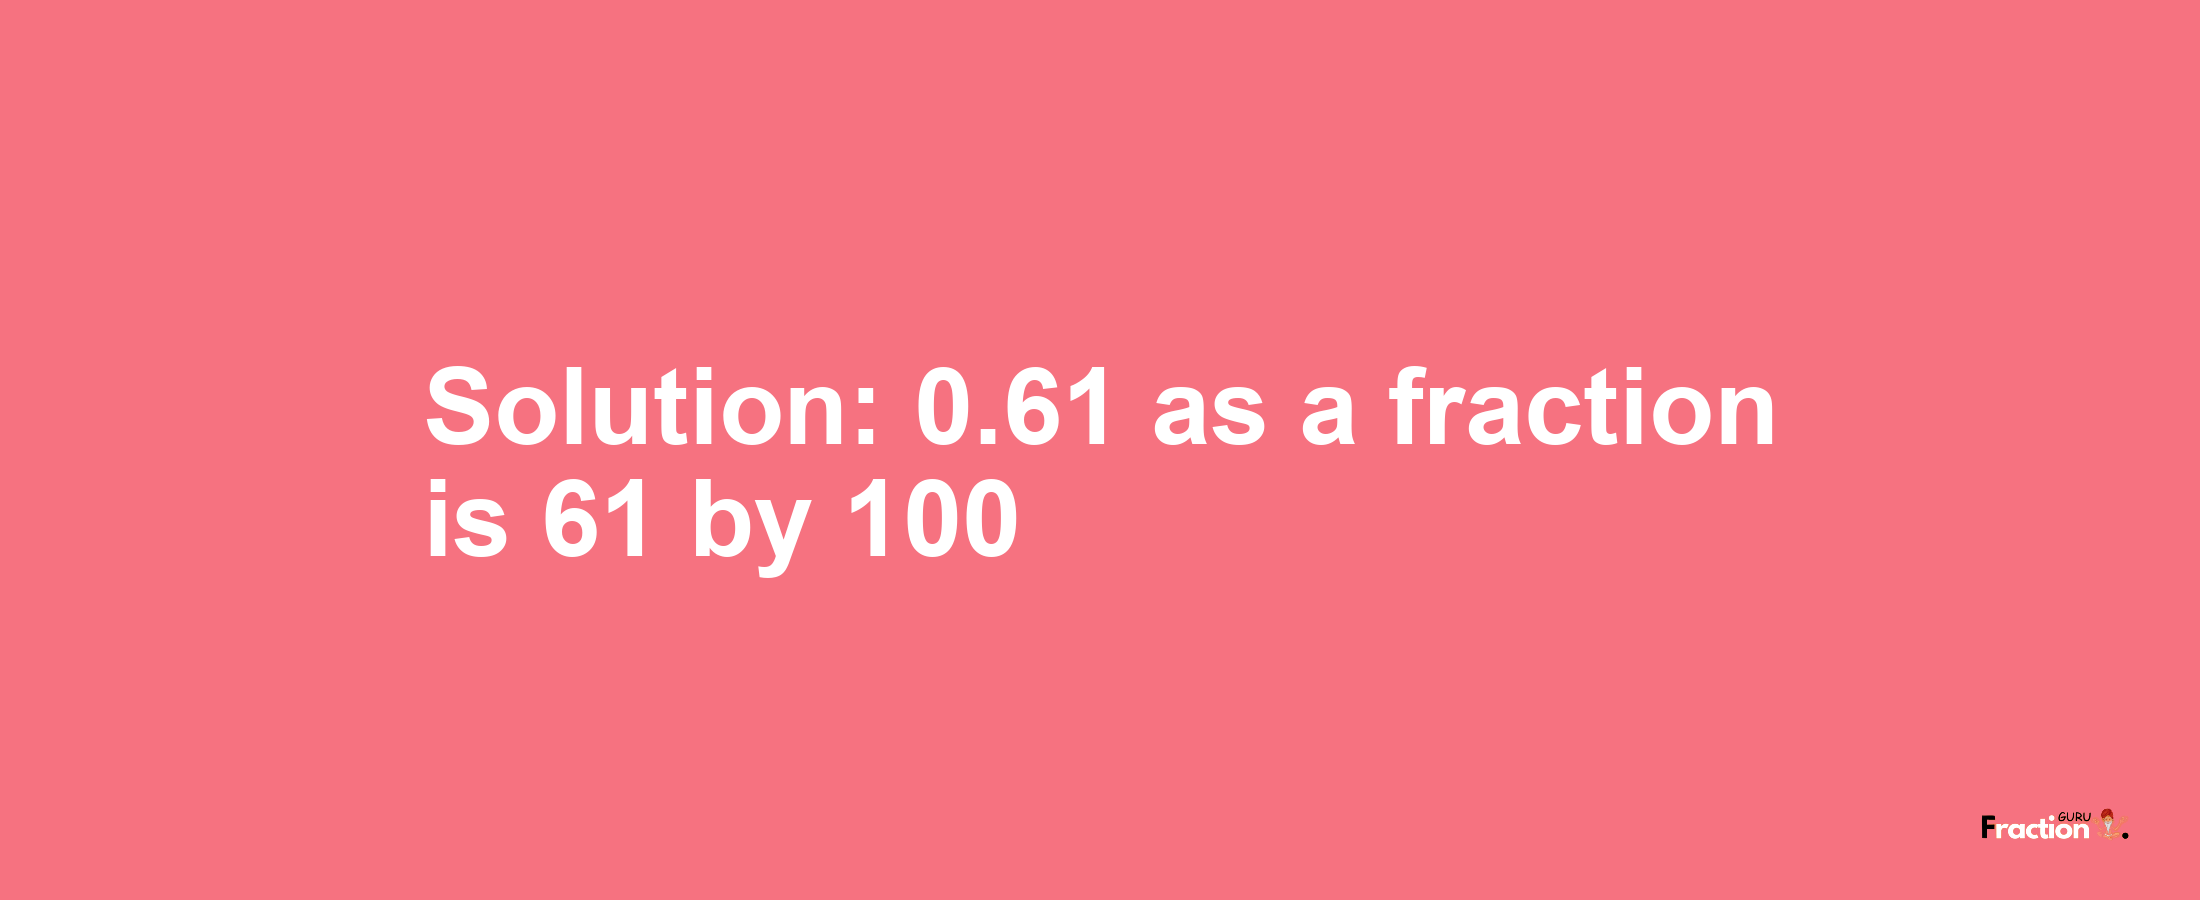 Solution:0.61 as a fraction is 61/100